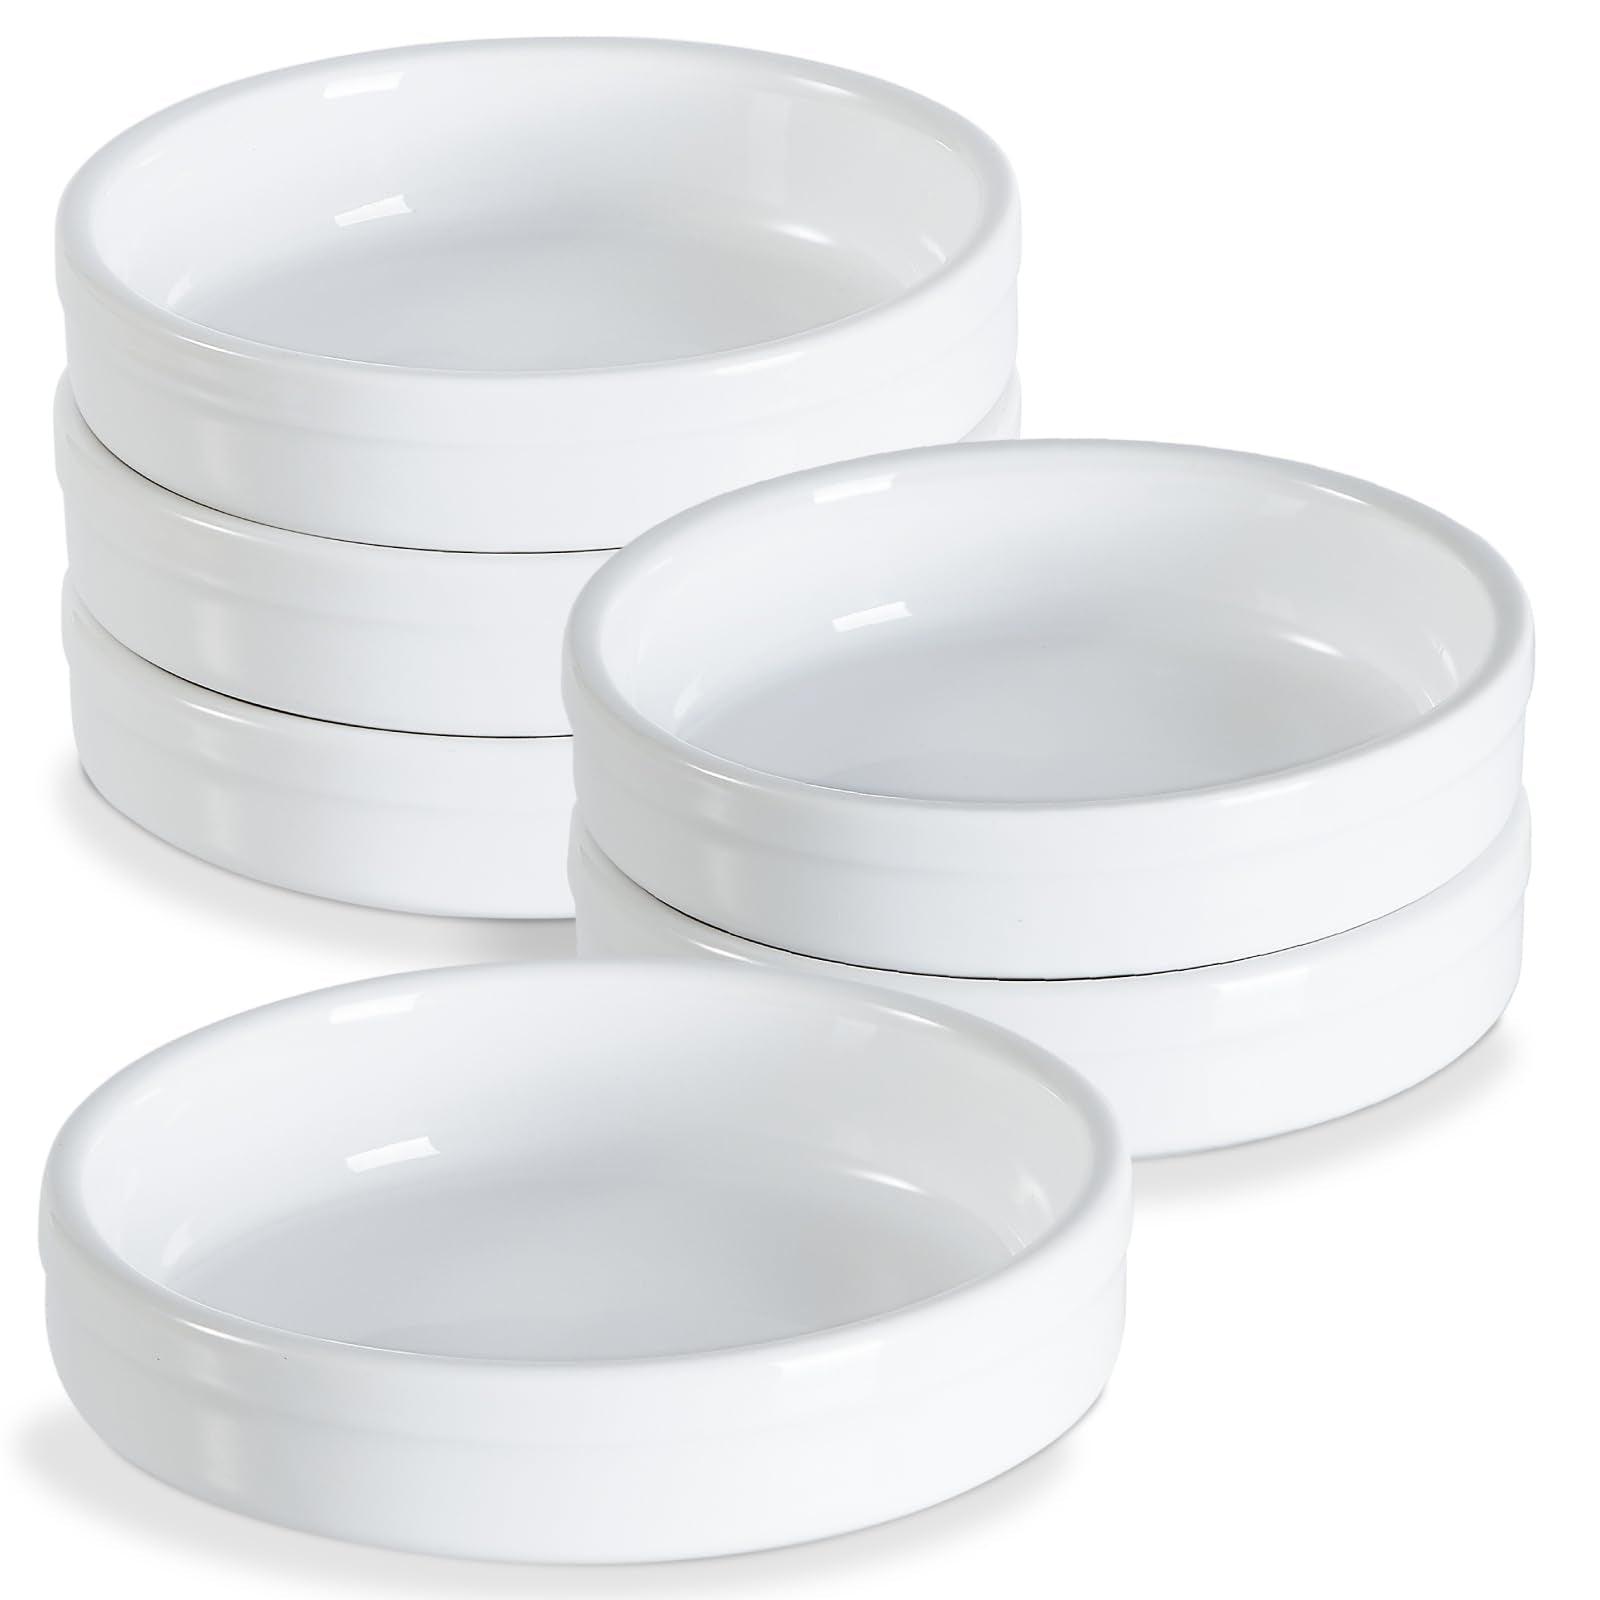 ONEMORE Ramekins 4 oz, Creme Brulee Ramekins Oven Safe Ceramic Shallow Souffle Dishes for Baking Custard, Mini Pies, Puddings and Dipping Sauces 4.5 inch White Mini Round Quiche Pans Set of 6 - CookCave